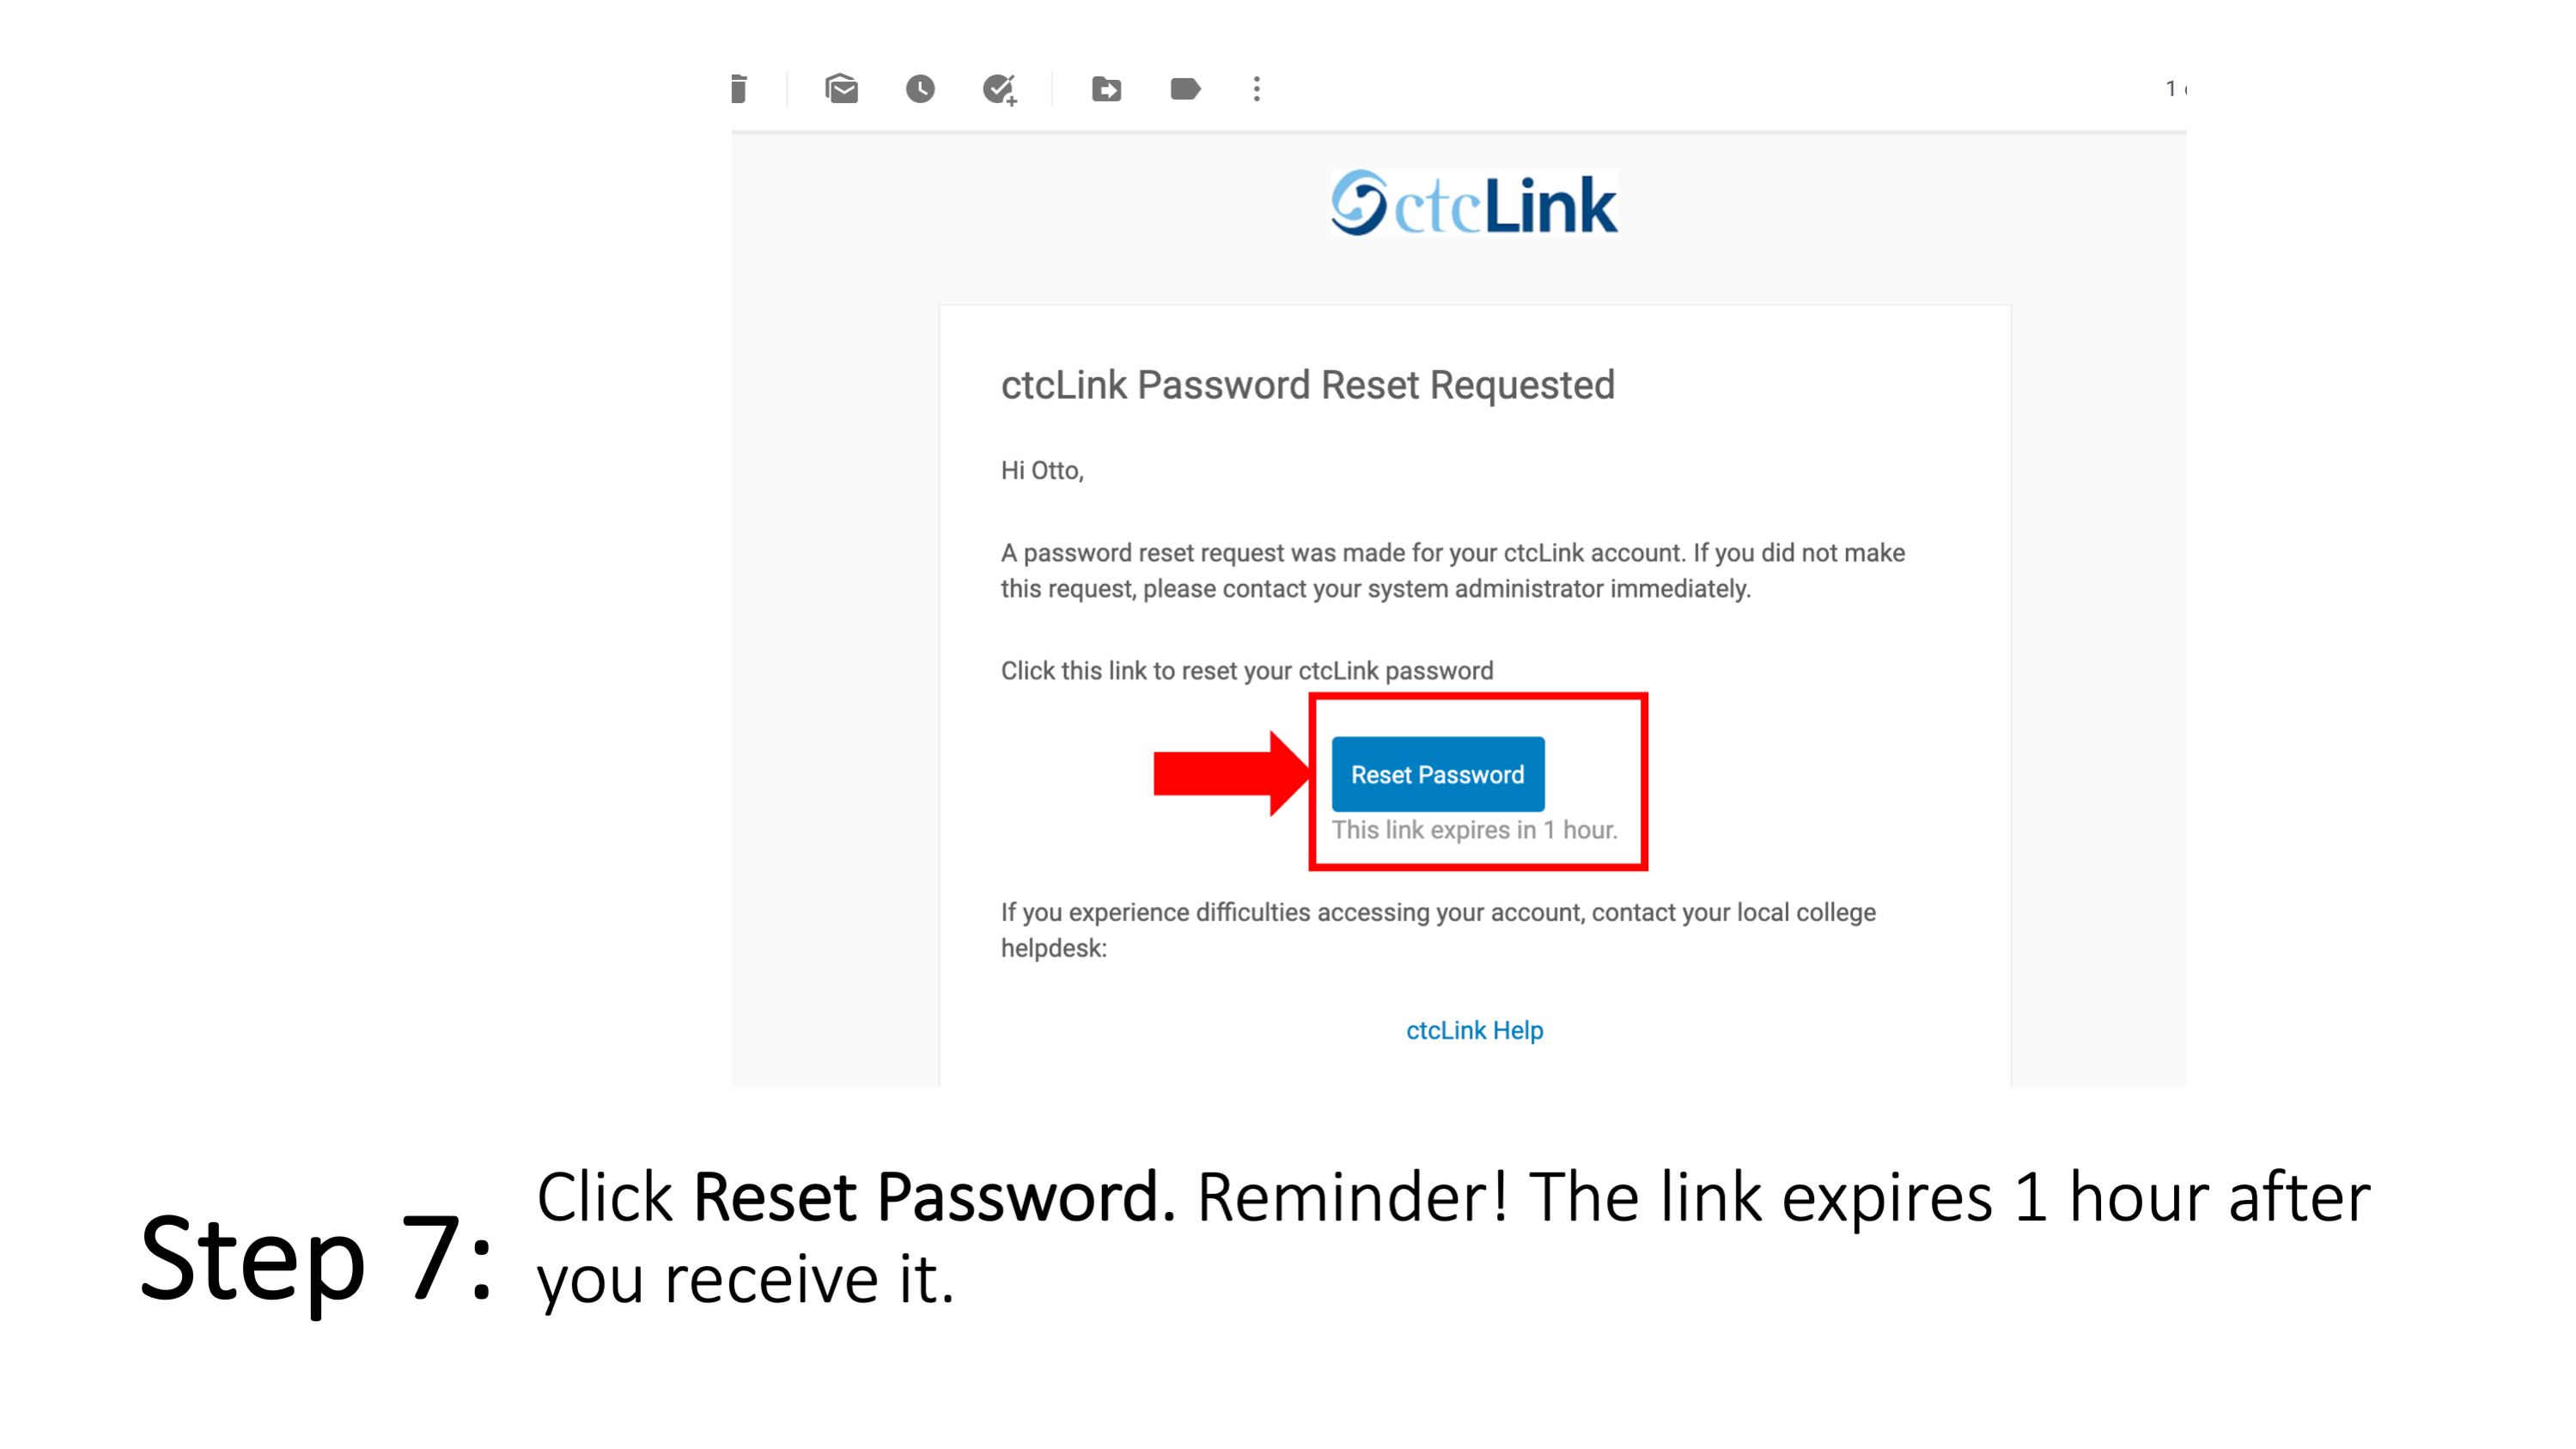 Step 7: Click Reset Password. Reminder! The link expires 1 hour after you receive it.